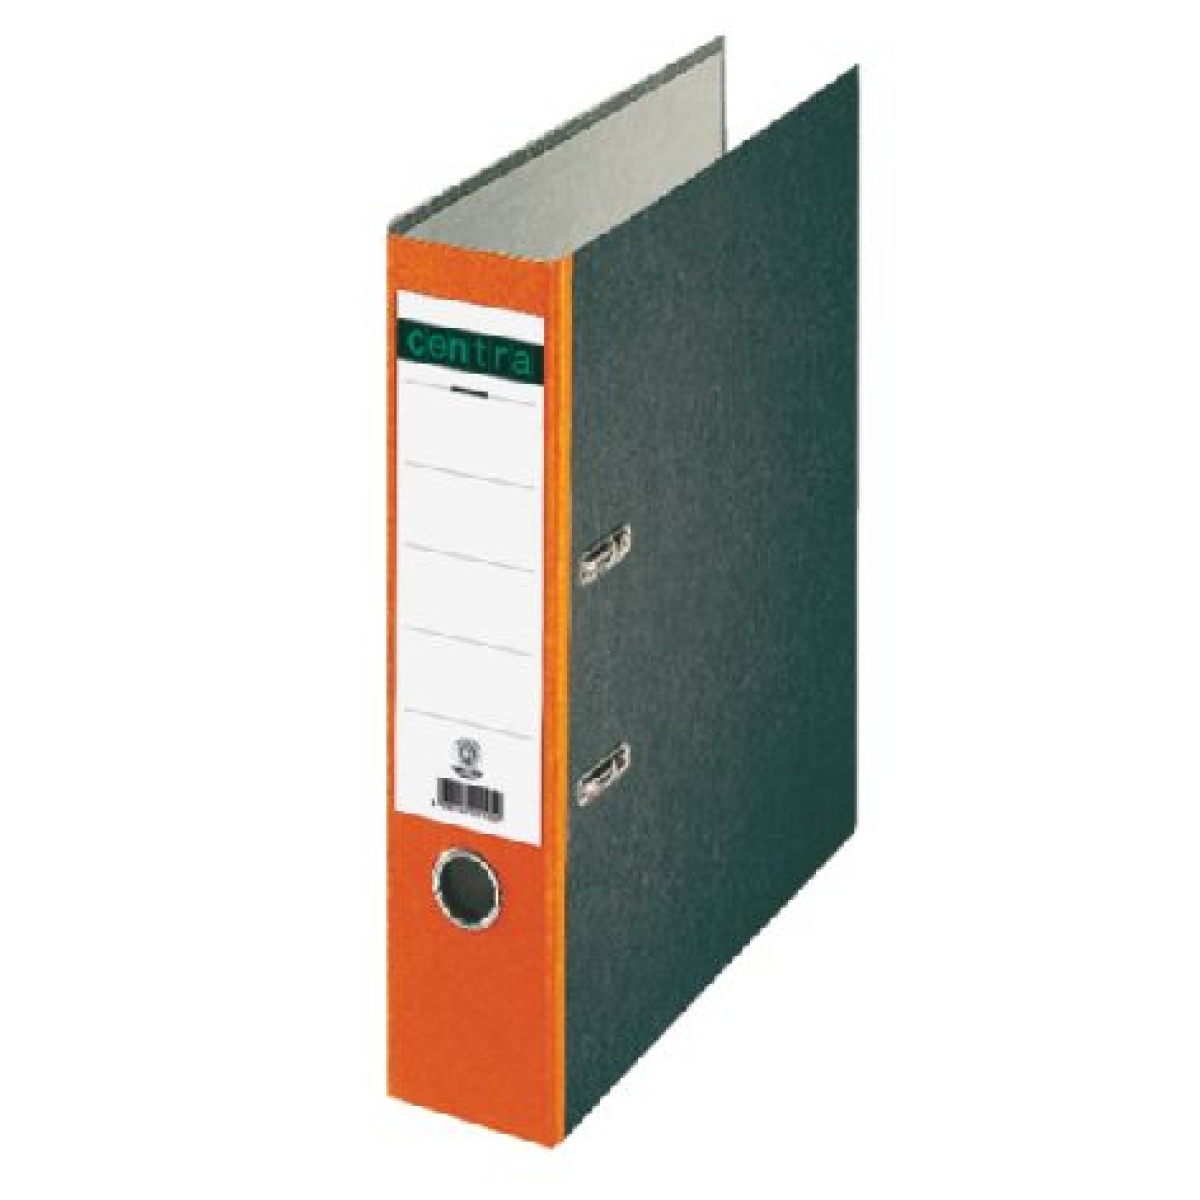 CentraFolder-Centra 80mm with colored spine orange 220126Article-No: 3034152201265